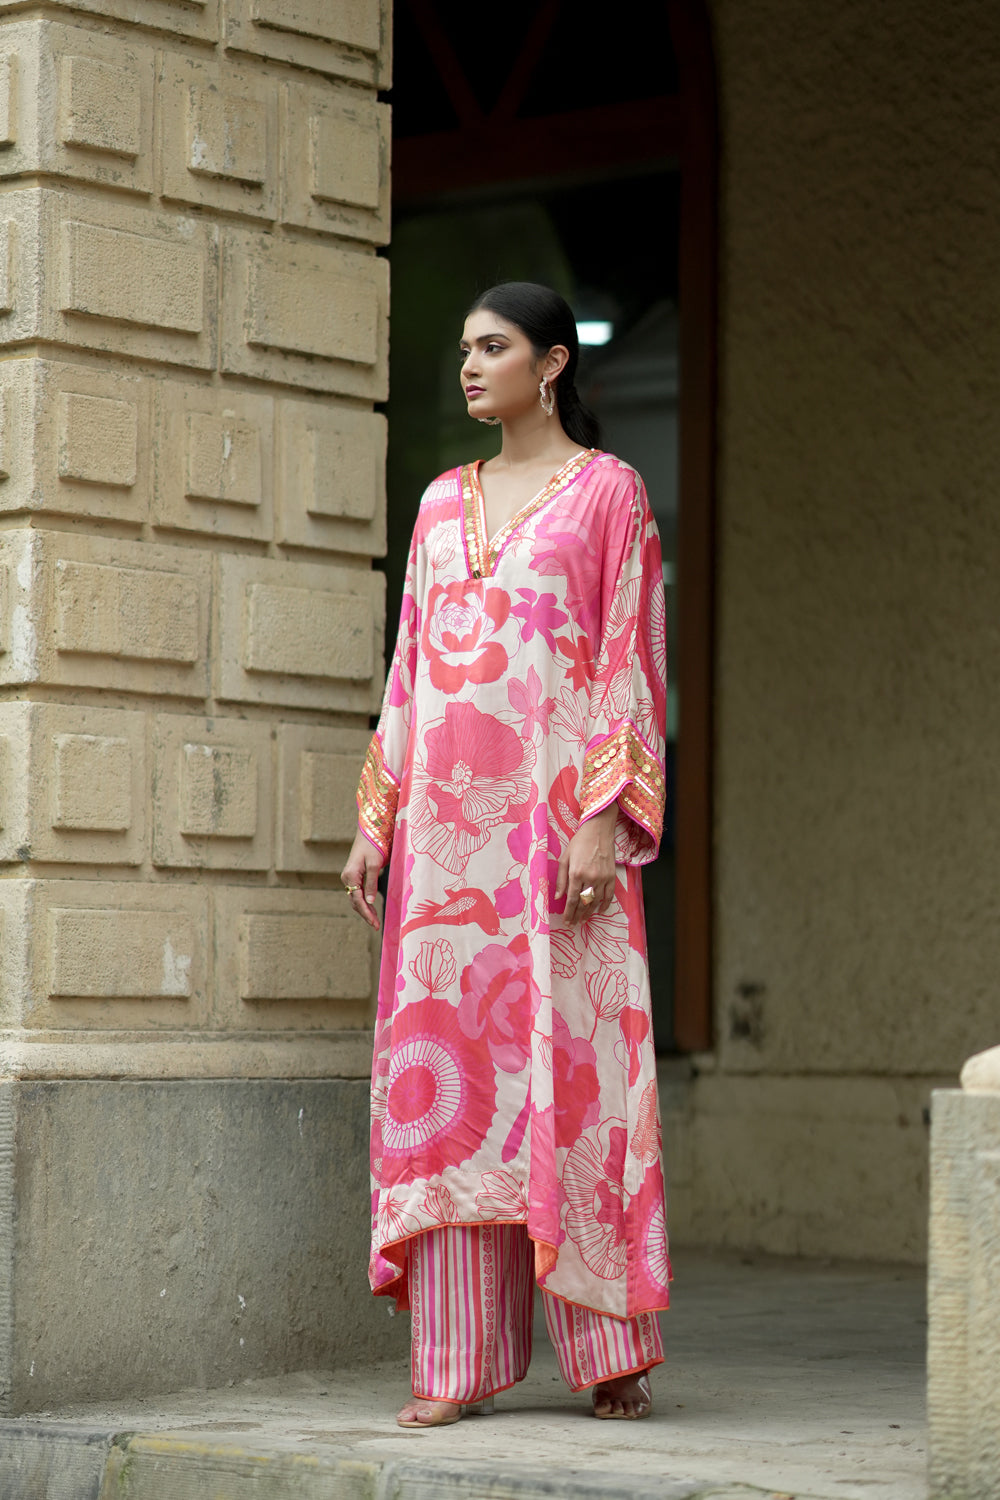 Beige floral kurta with culottes